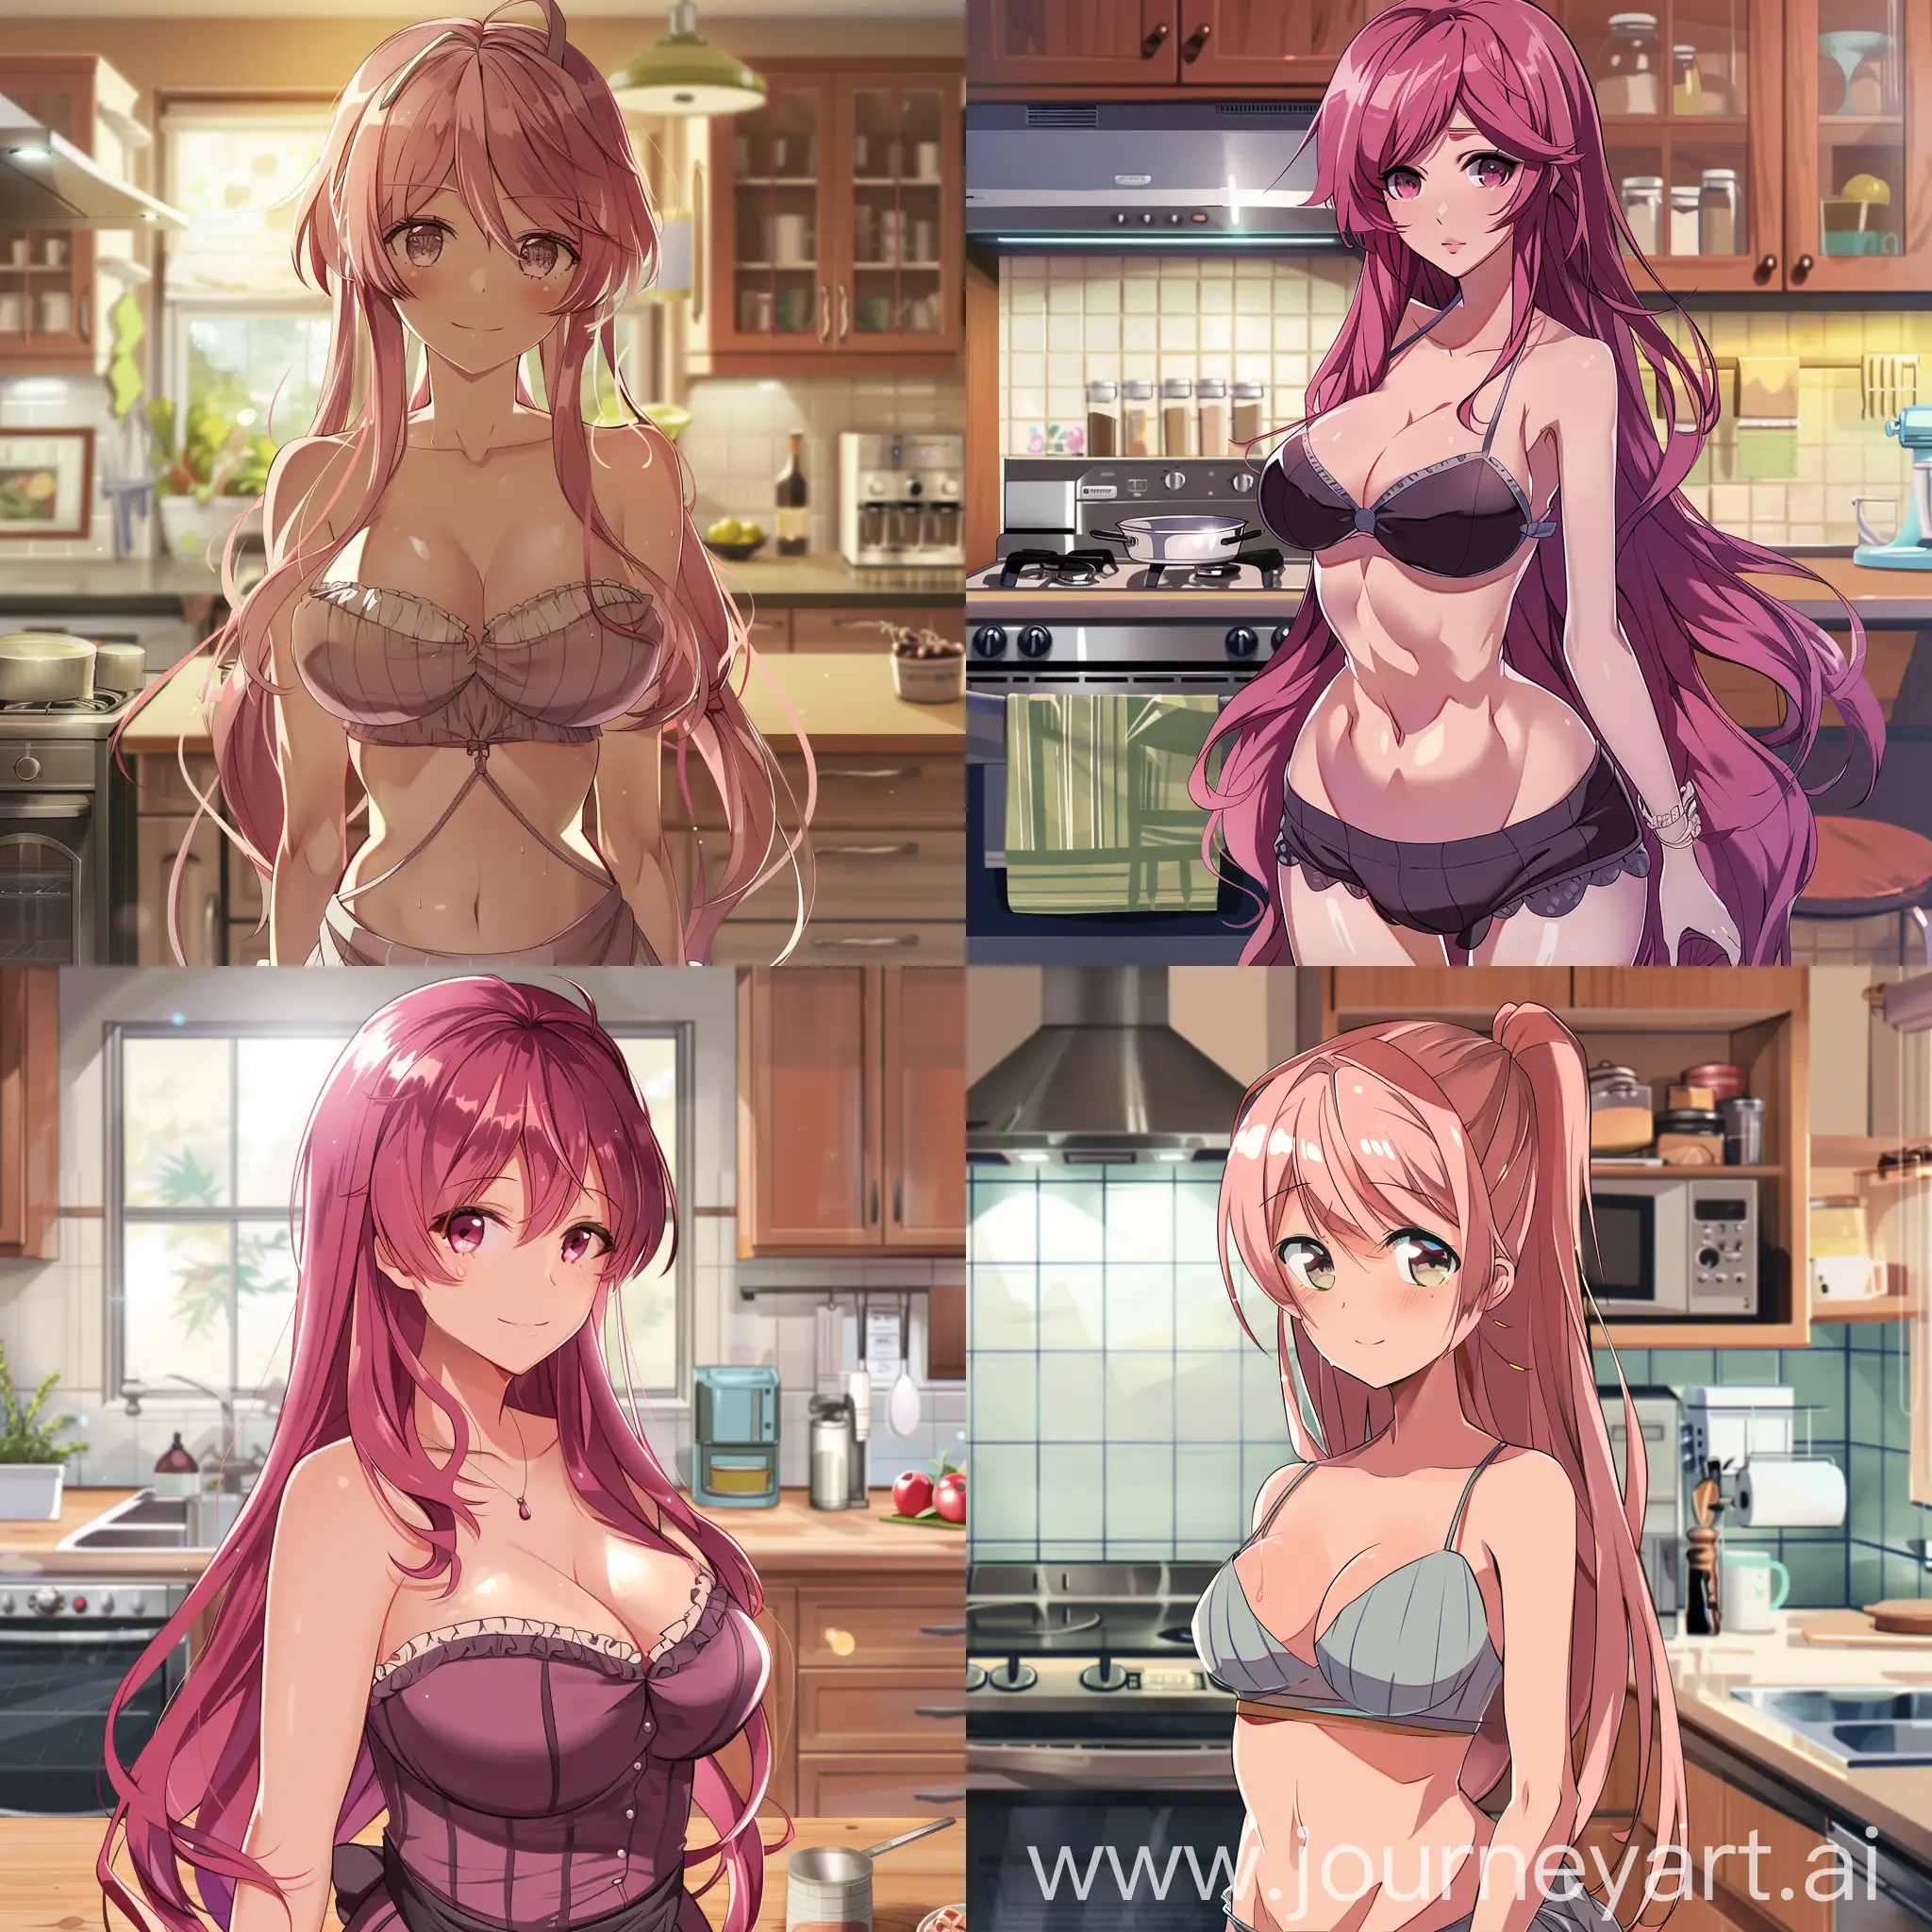 Animestyle-Motherly-Woman-with-Pink-Hair-in-Kitchen-Setting